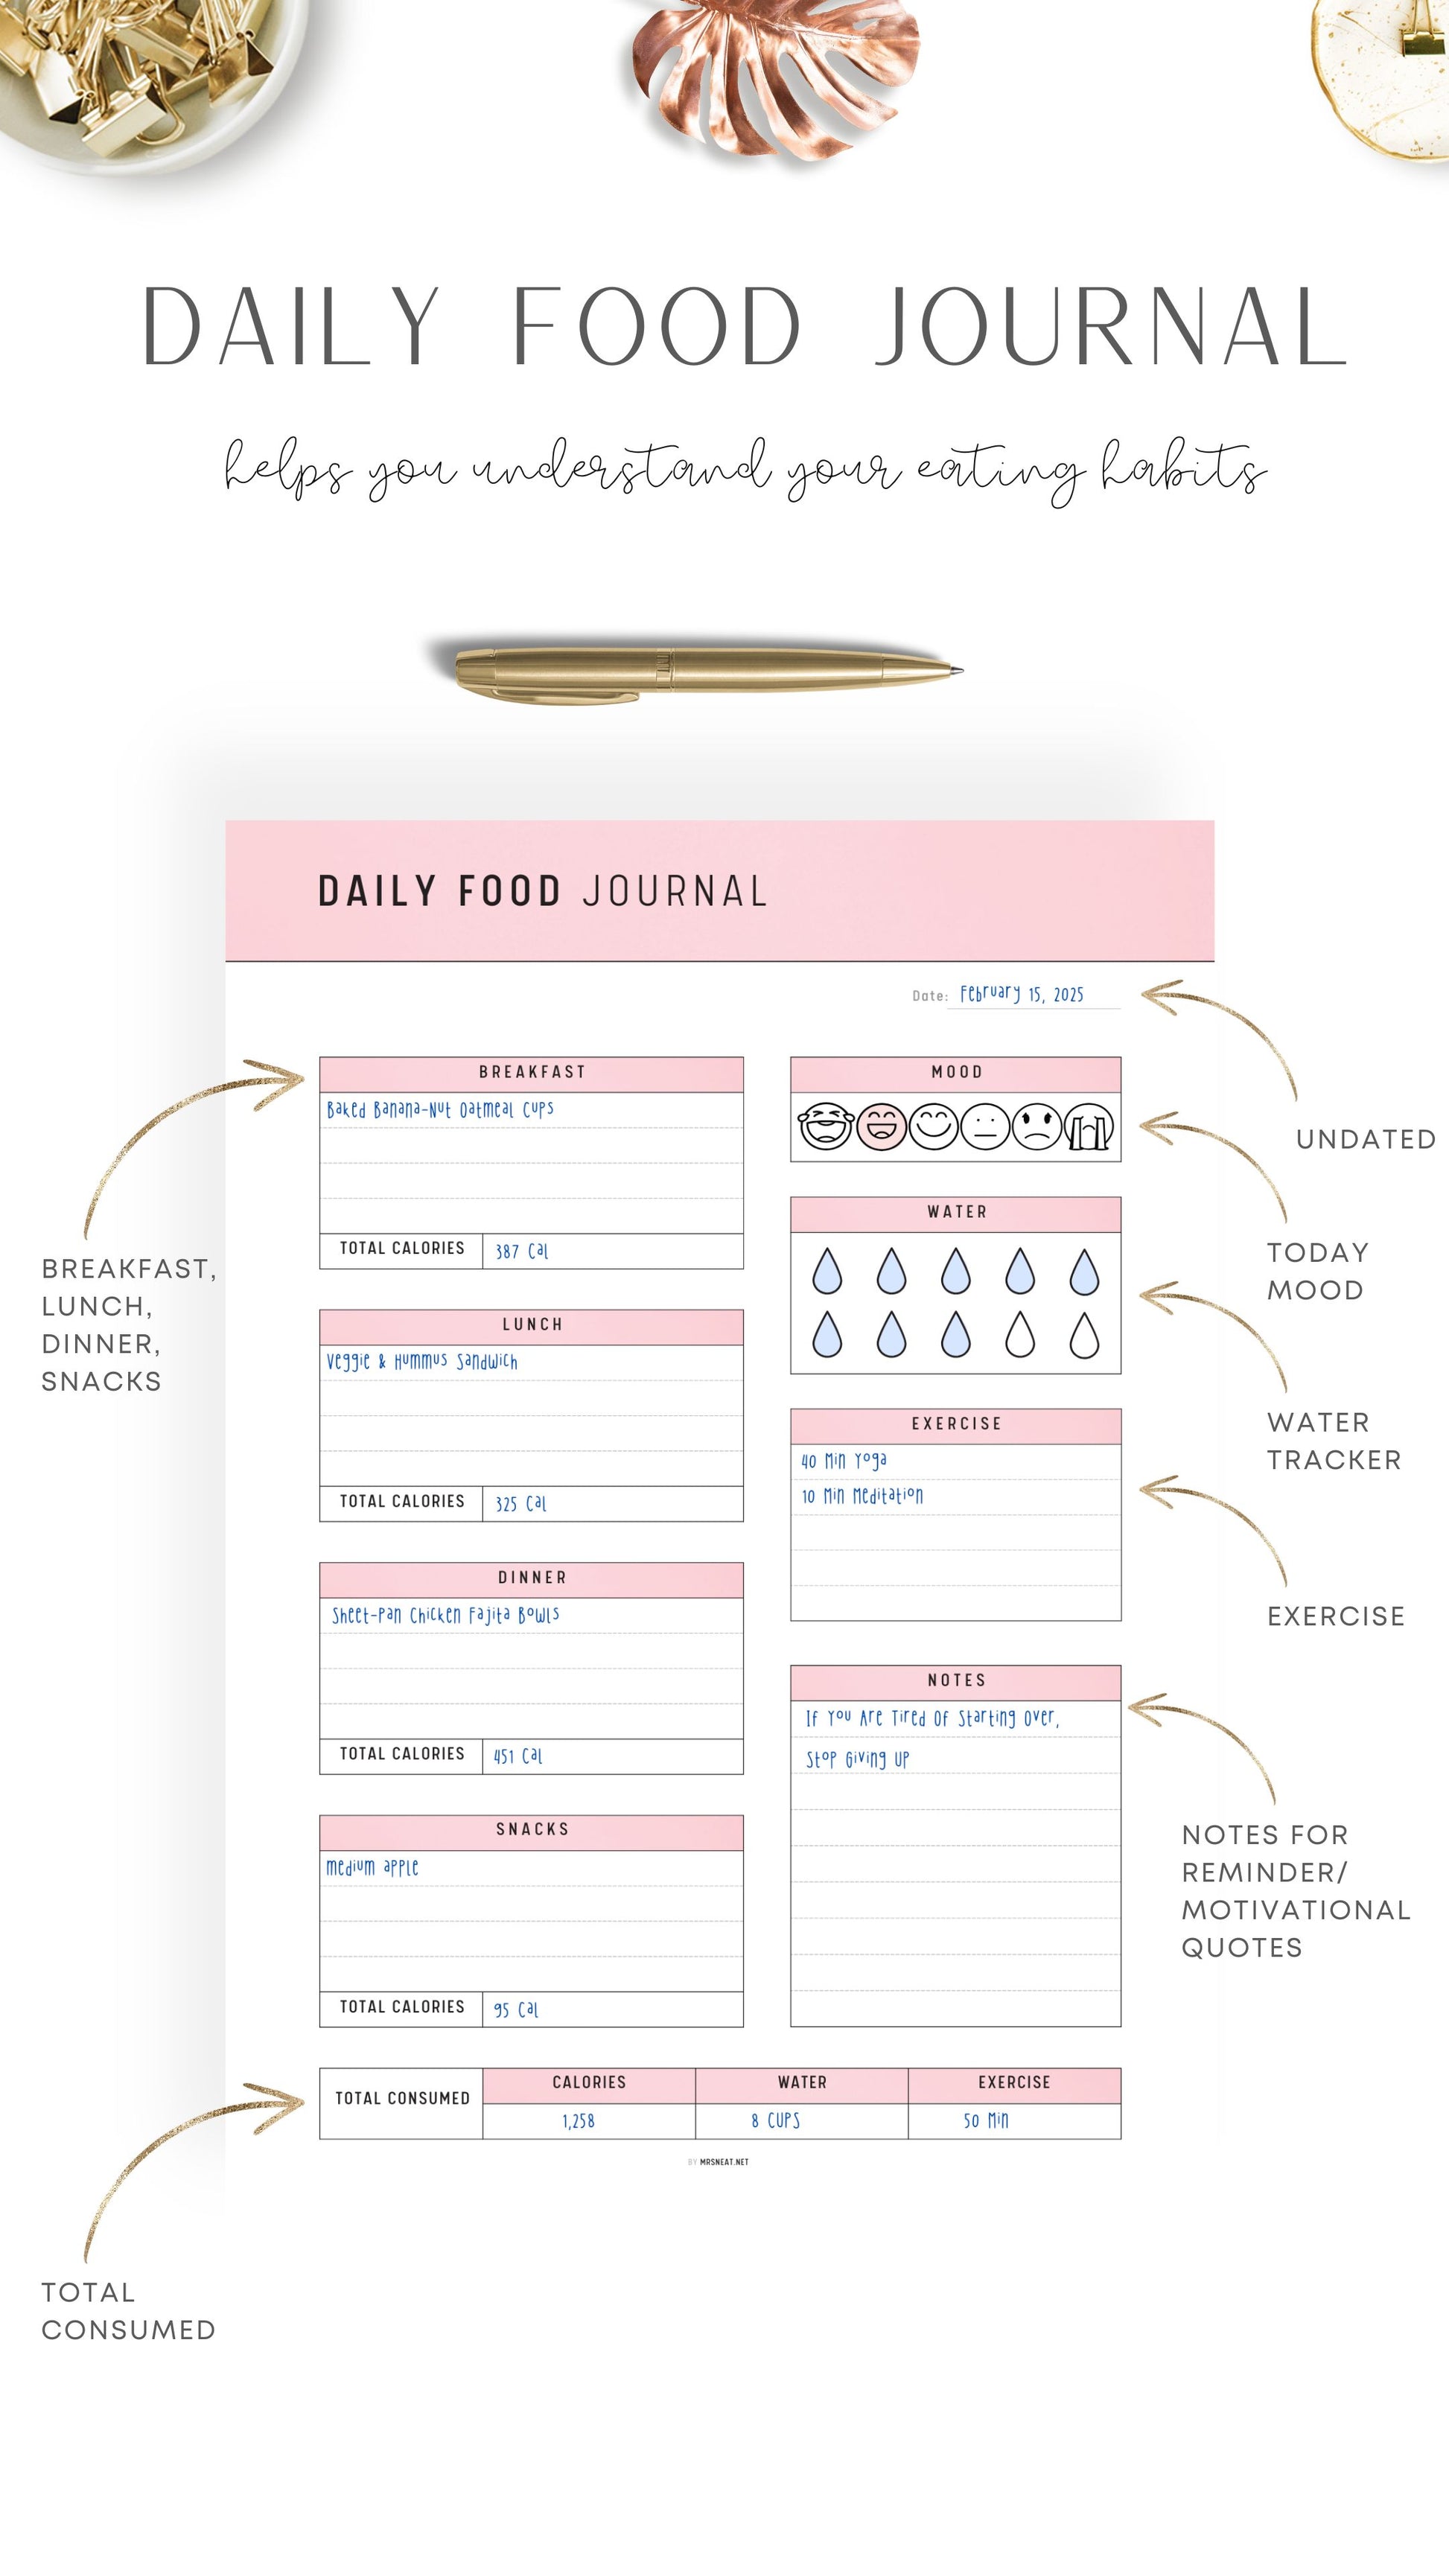 How to use Printable Daily Food Journal Template